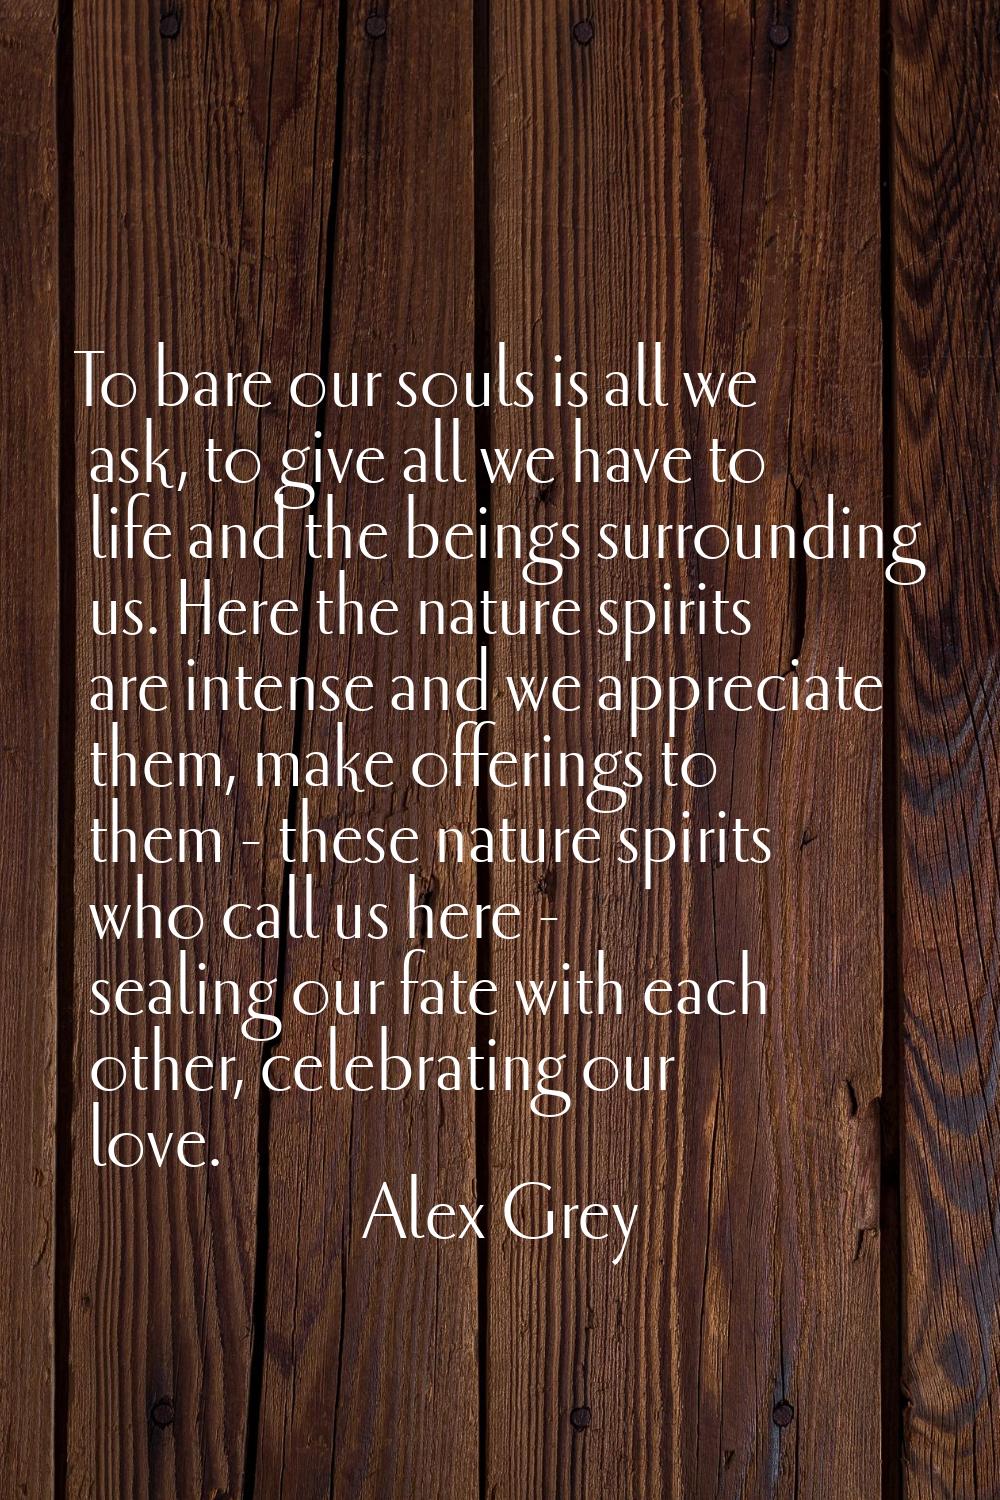 To bare our souls is all we ask, to give all we have to life and the beings surrounding us. Here th